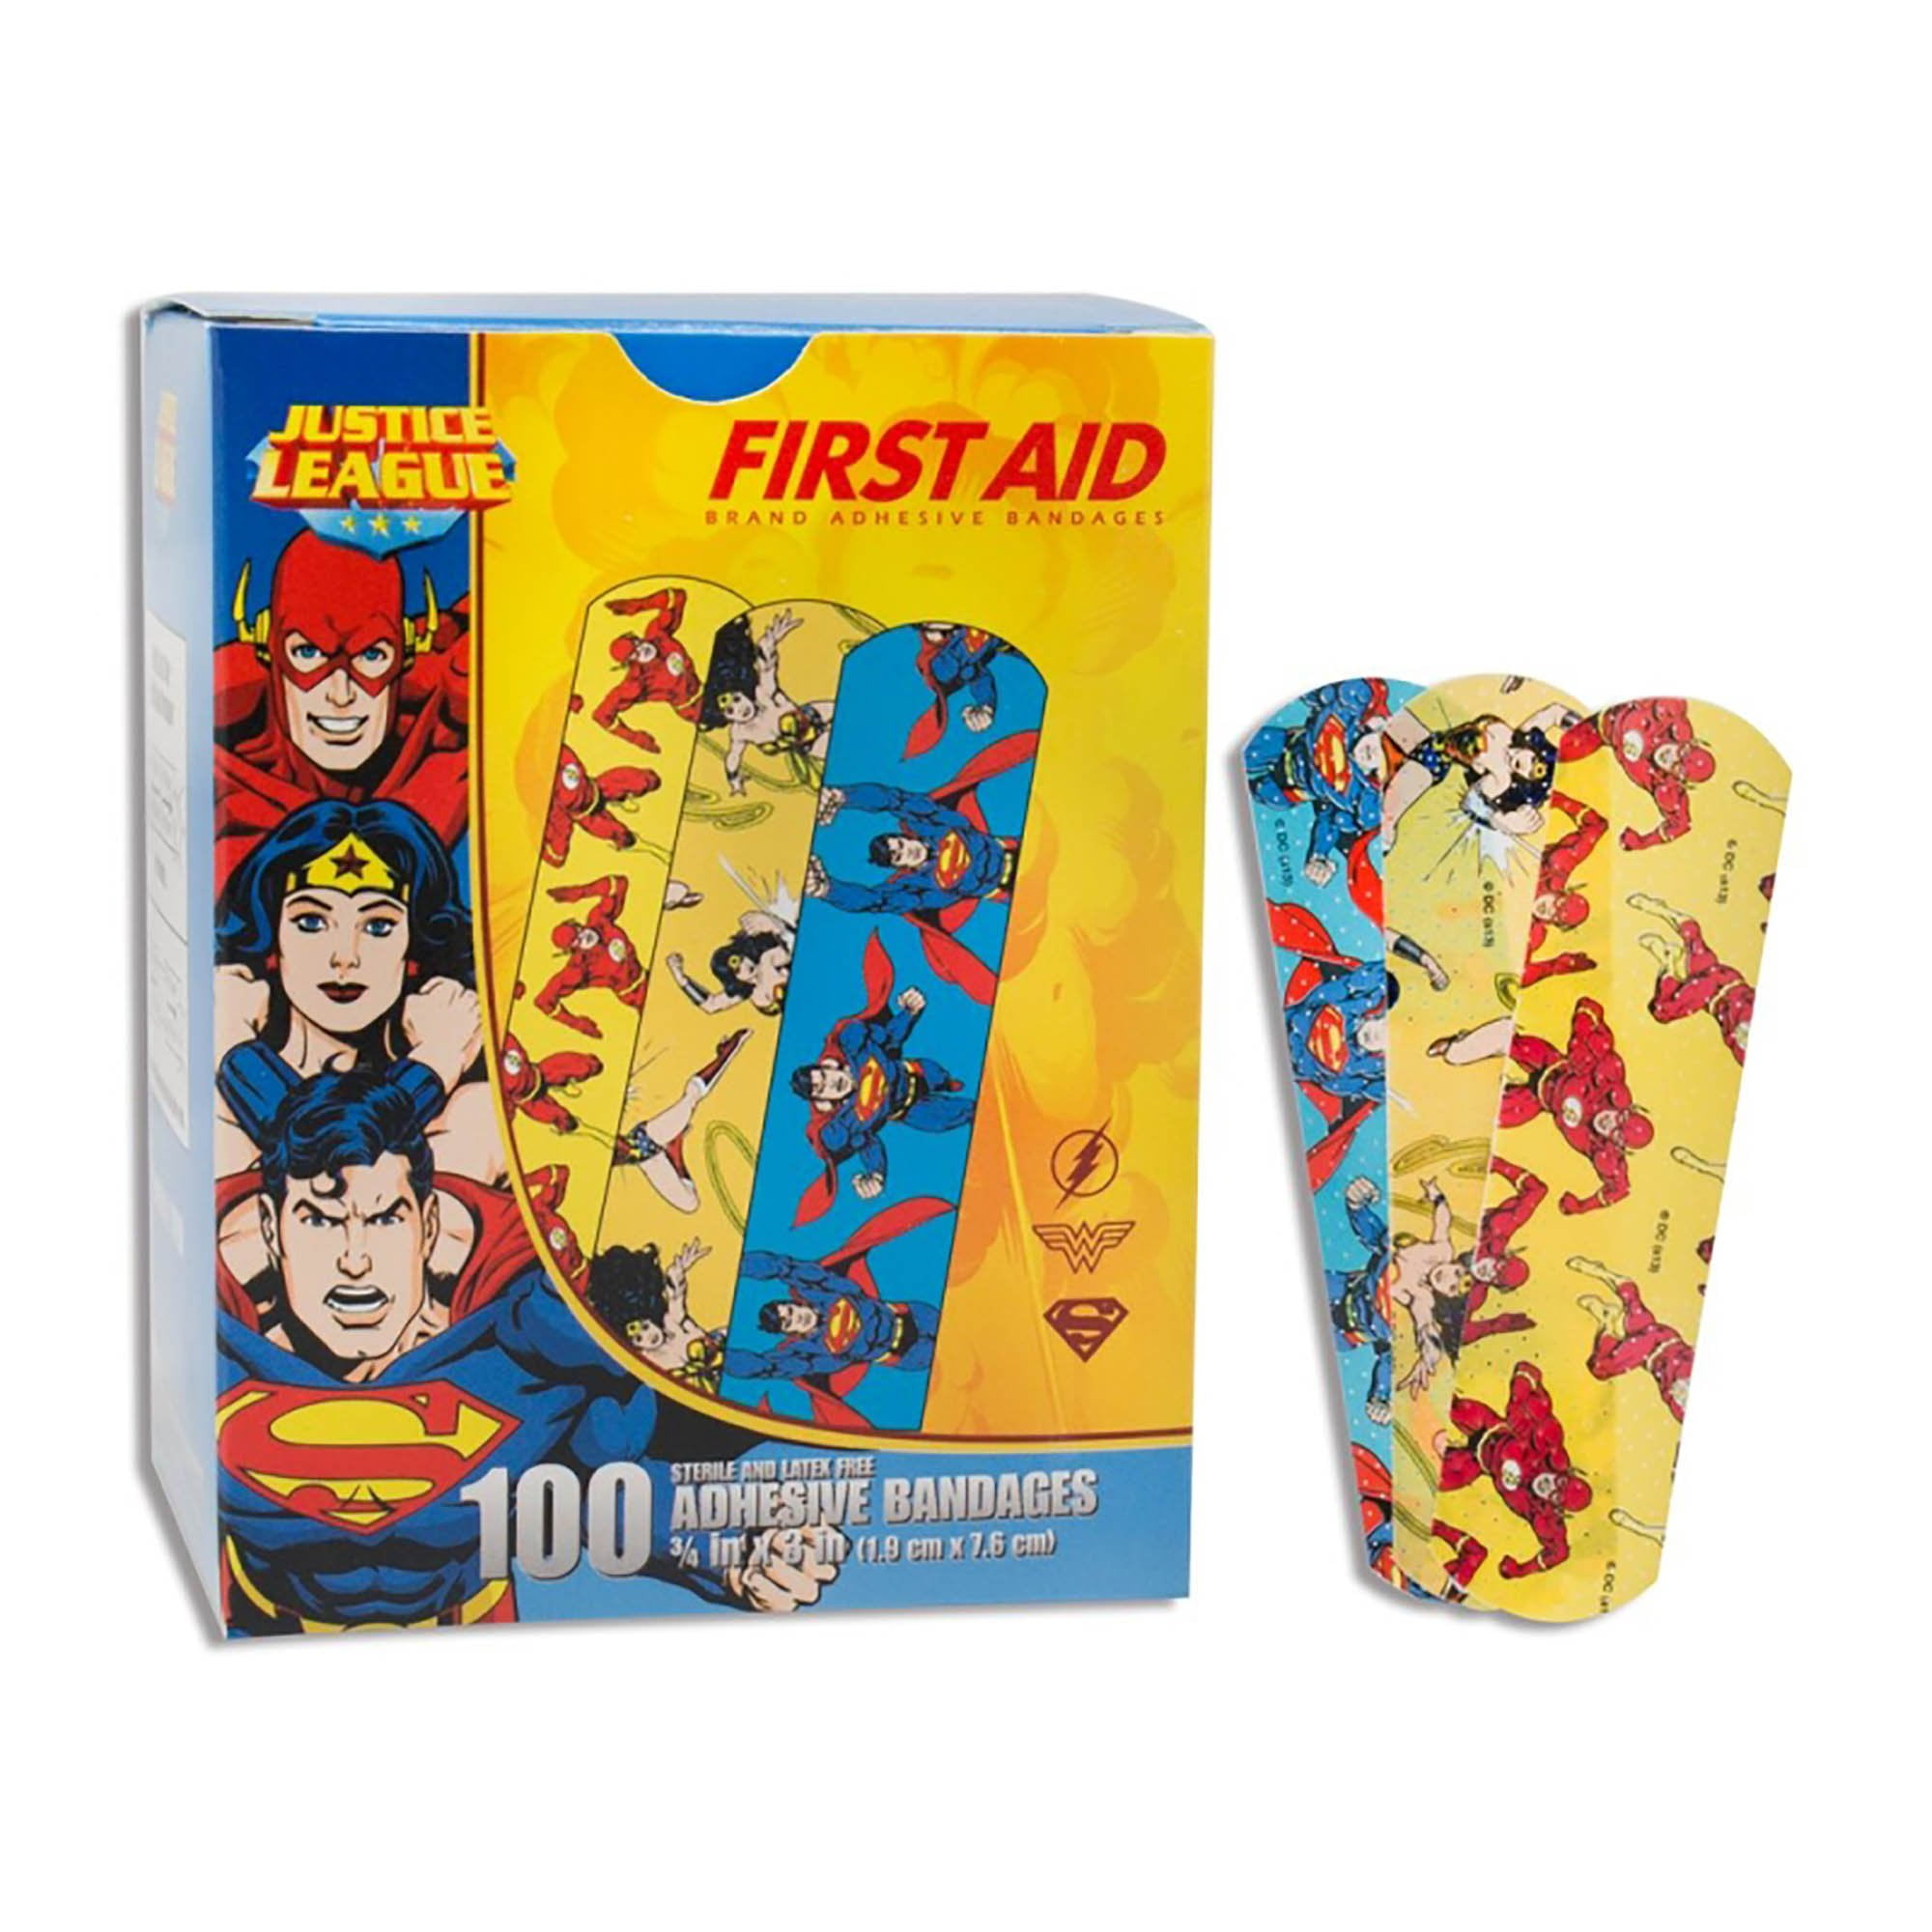  Hot Wheels Stat Strip Bandages by American White Cross